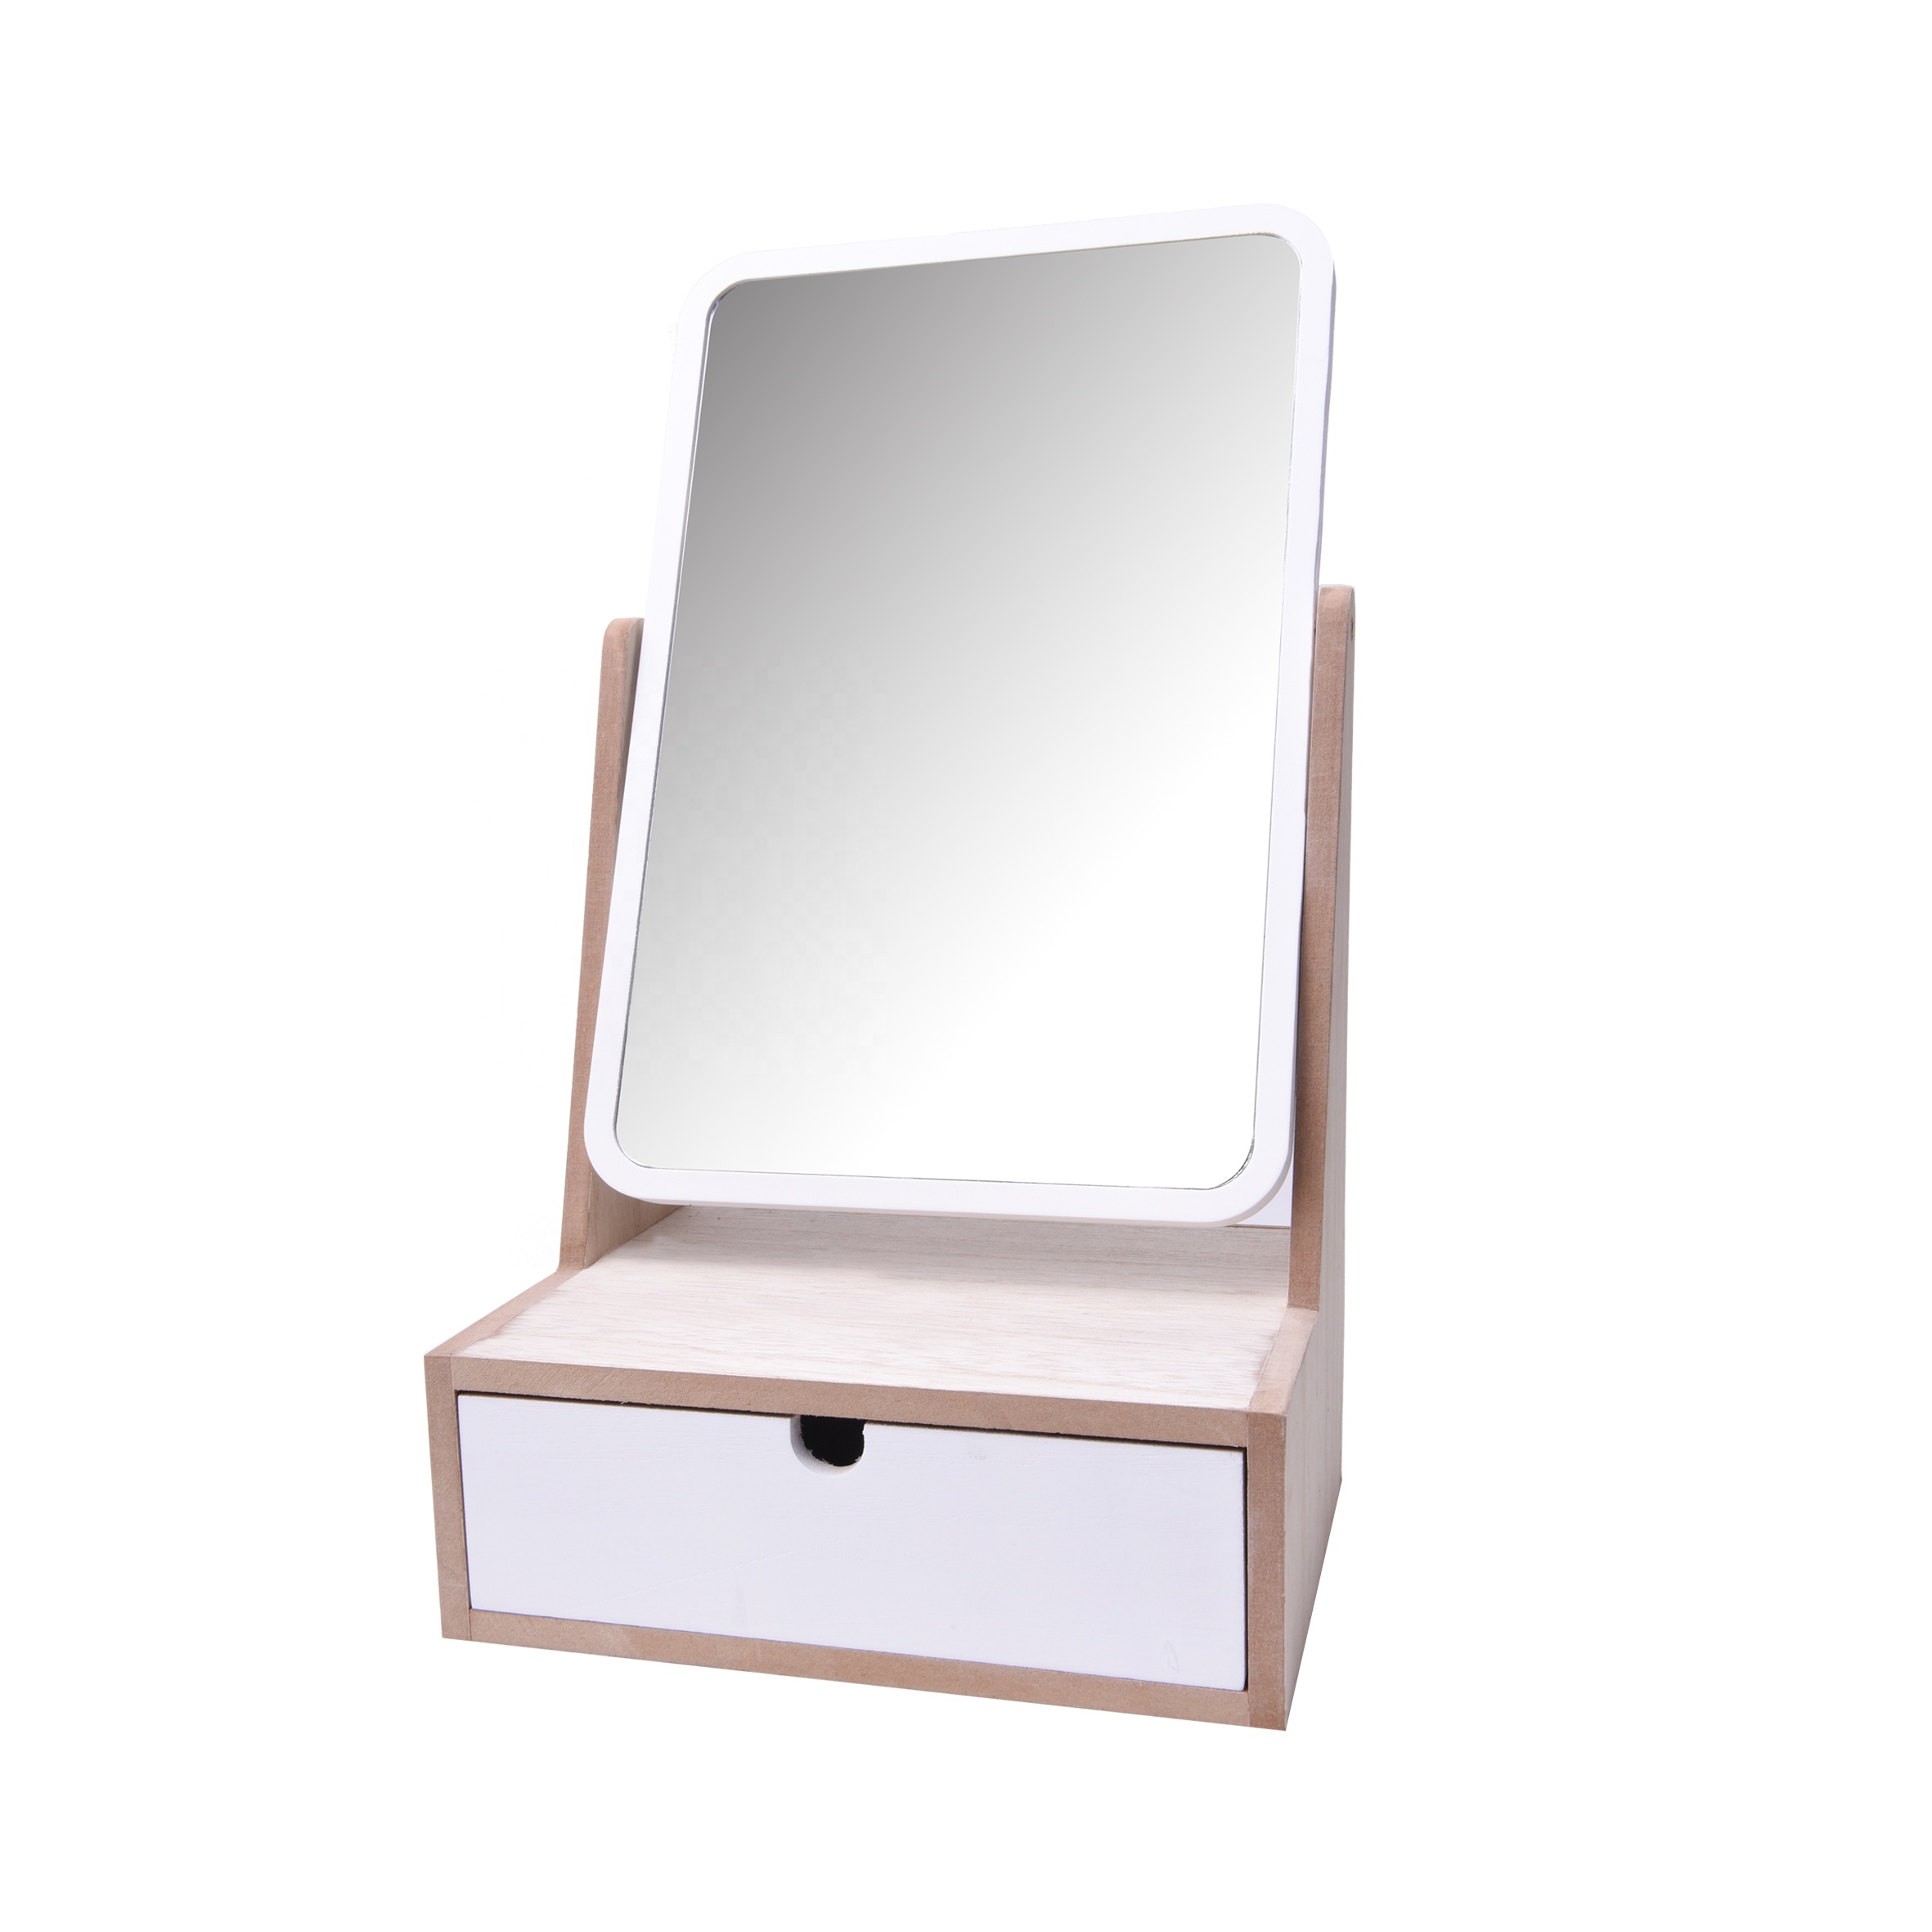 High Quality pink wooden jewelry cosmetic Makeup storage box organizer with mirror